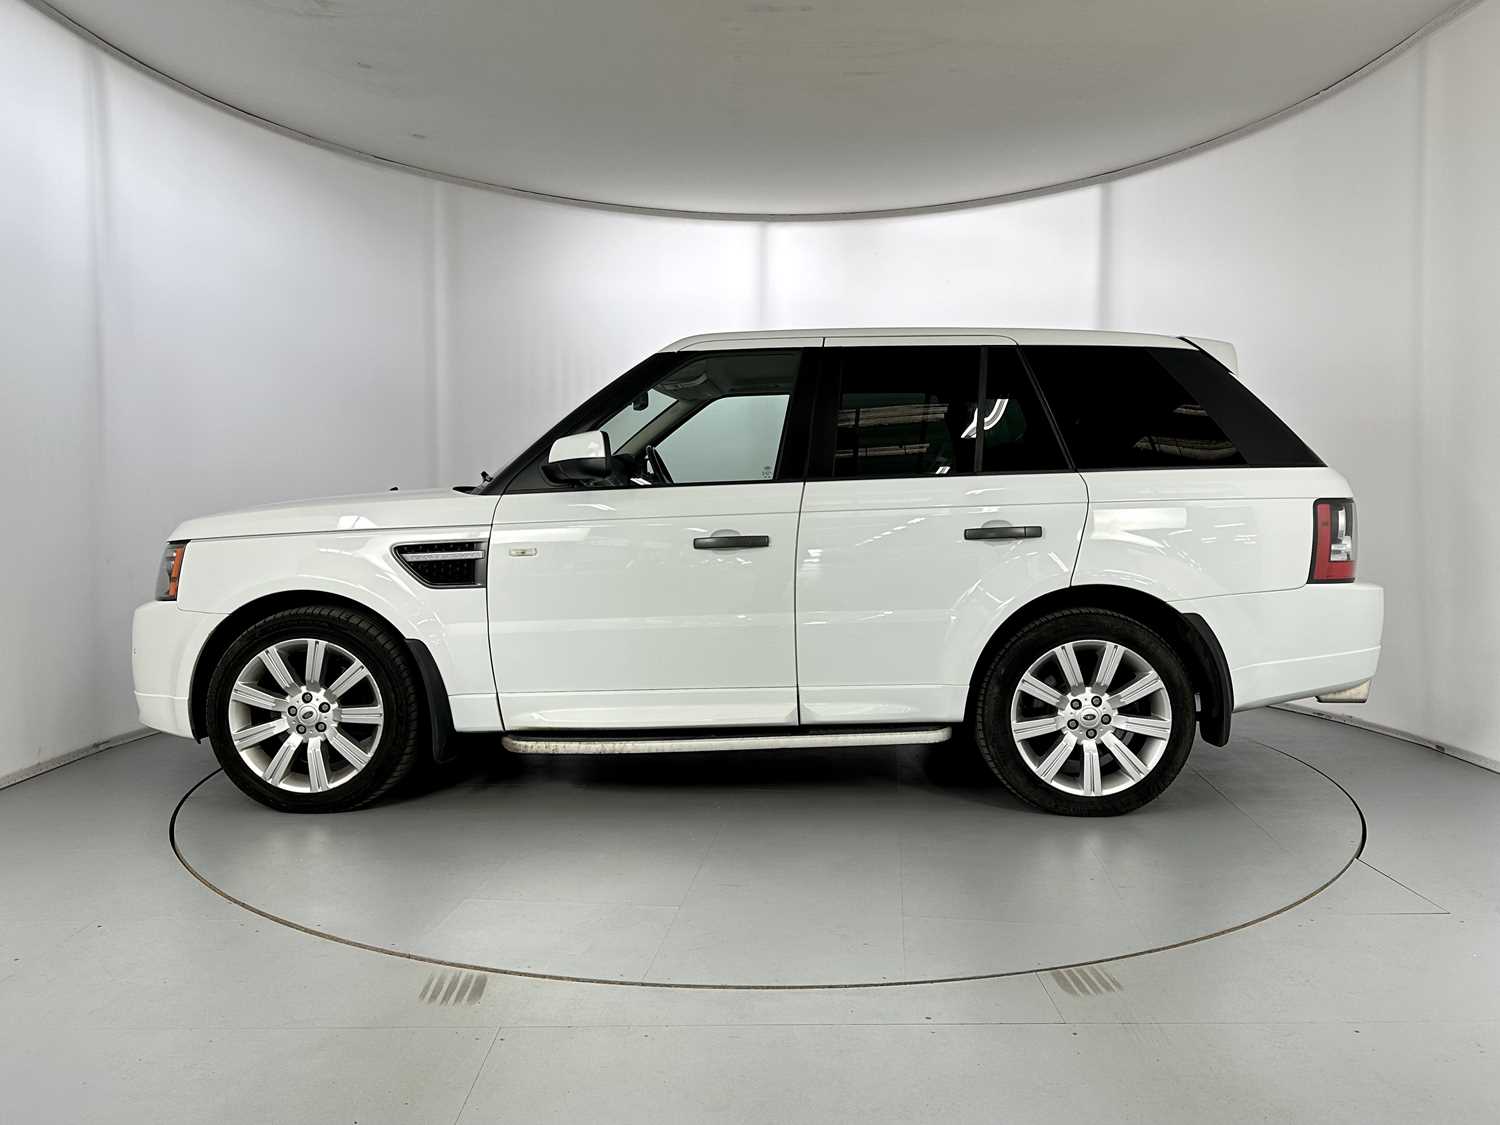 2011 Land Rover Range Rover Sport Stormer Edition  - Image 5 of 33